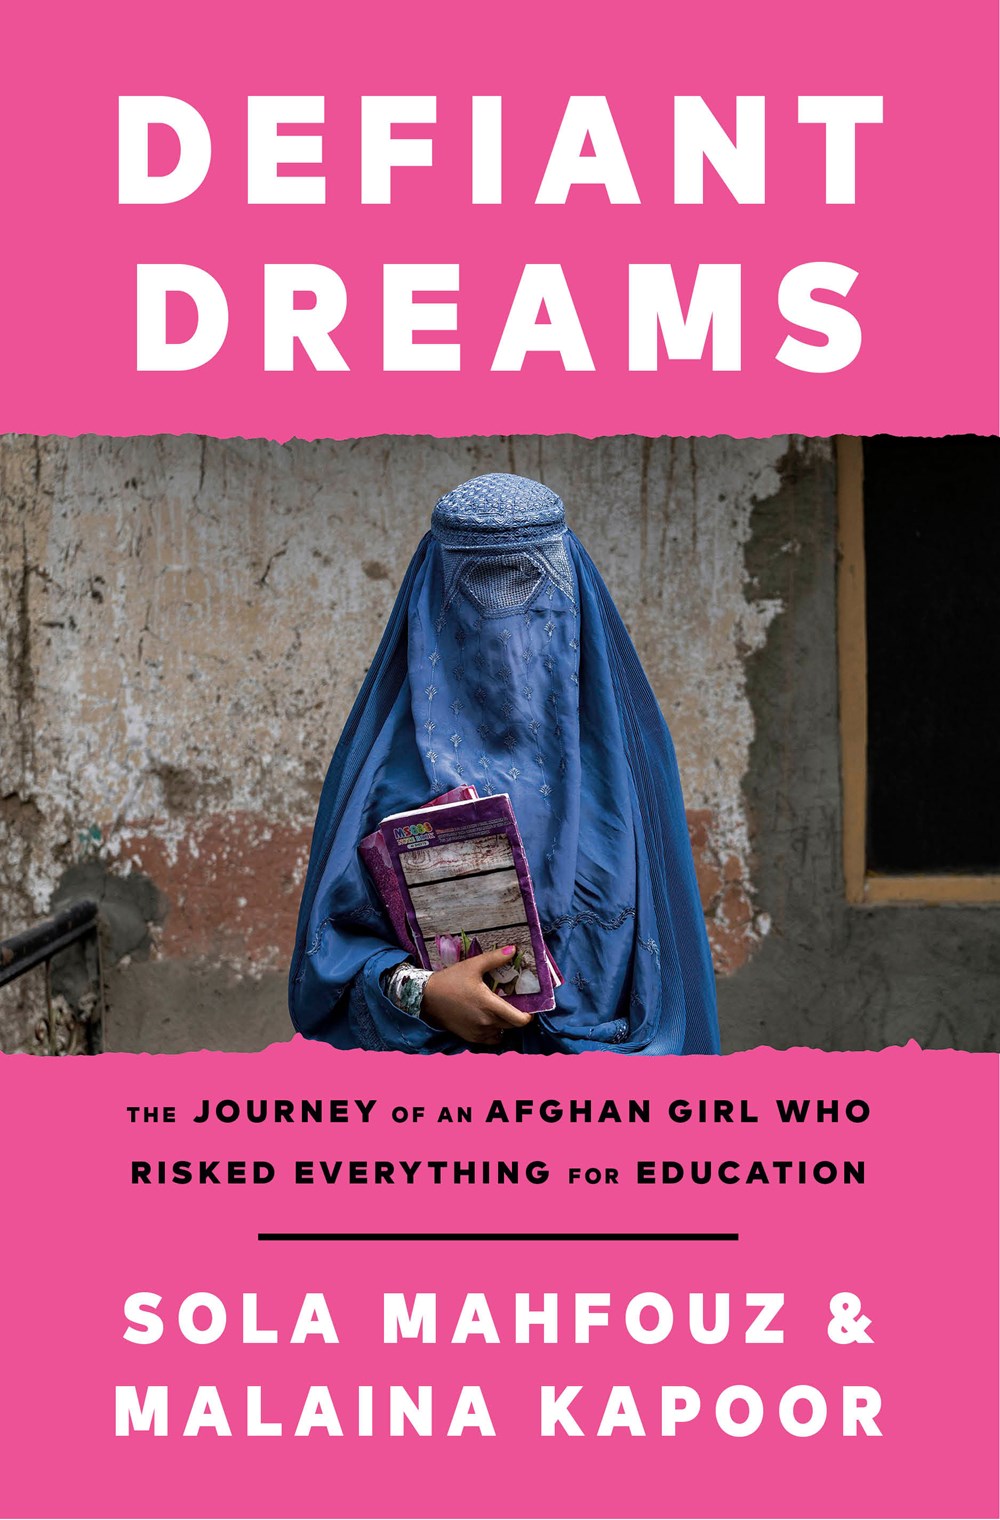 Defiant Dreams: The Journey of an Afghan Girl Who Risked Everything for Education